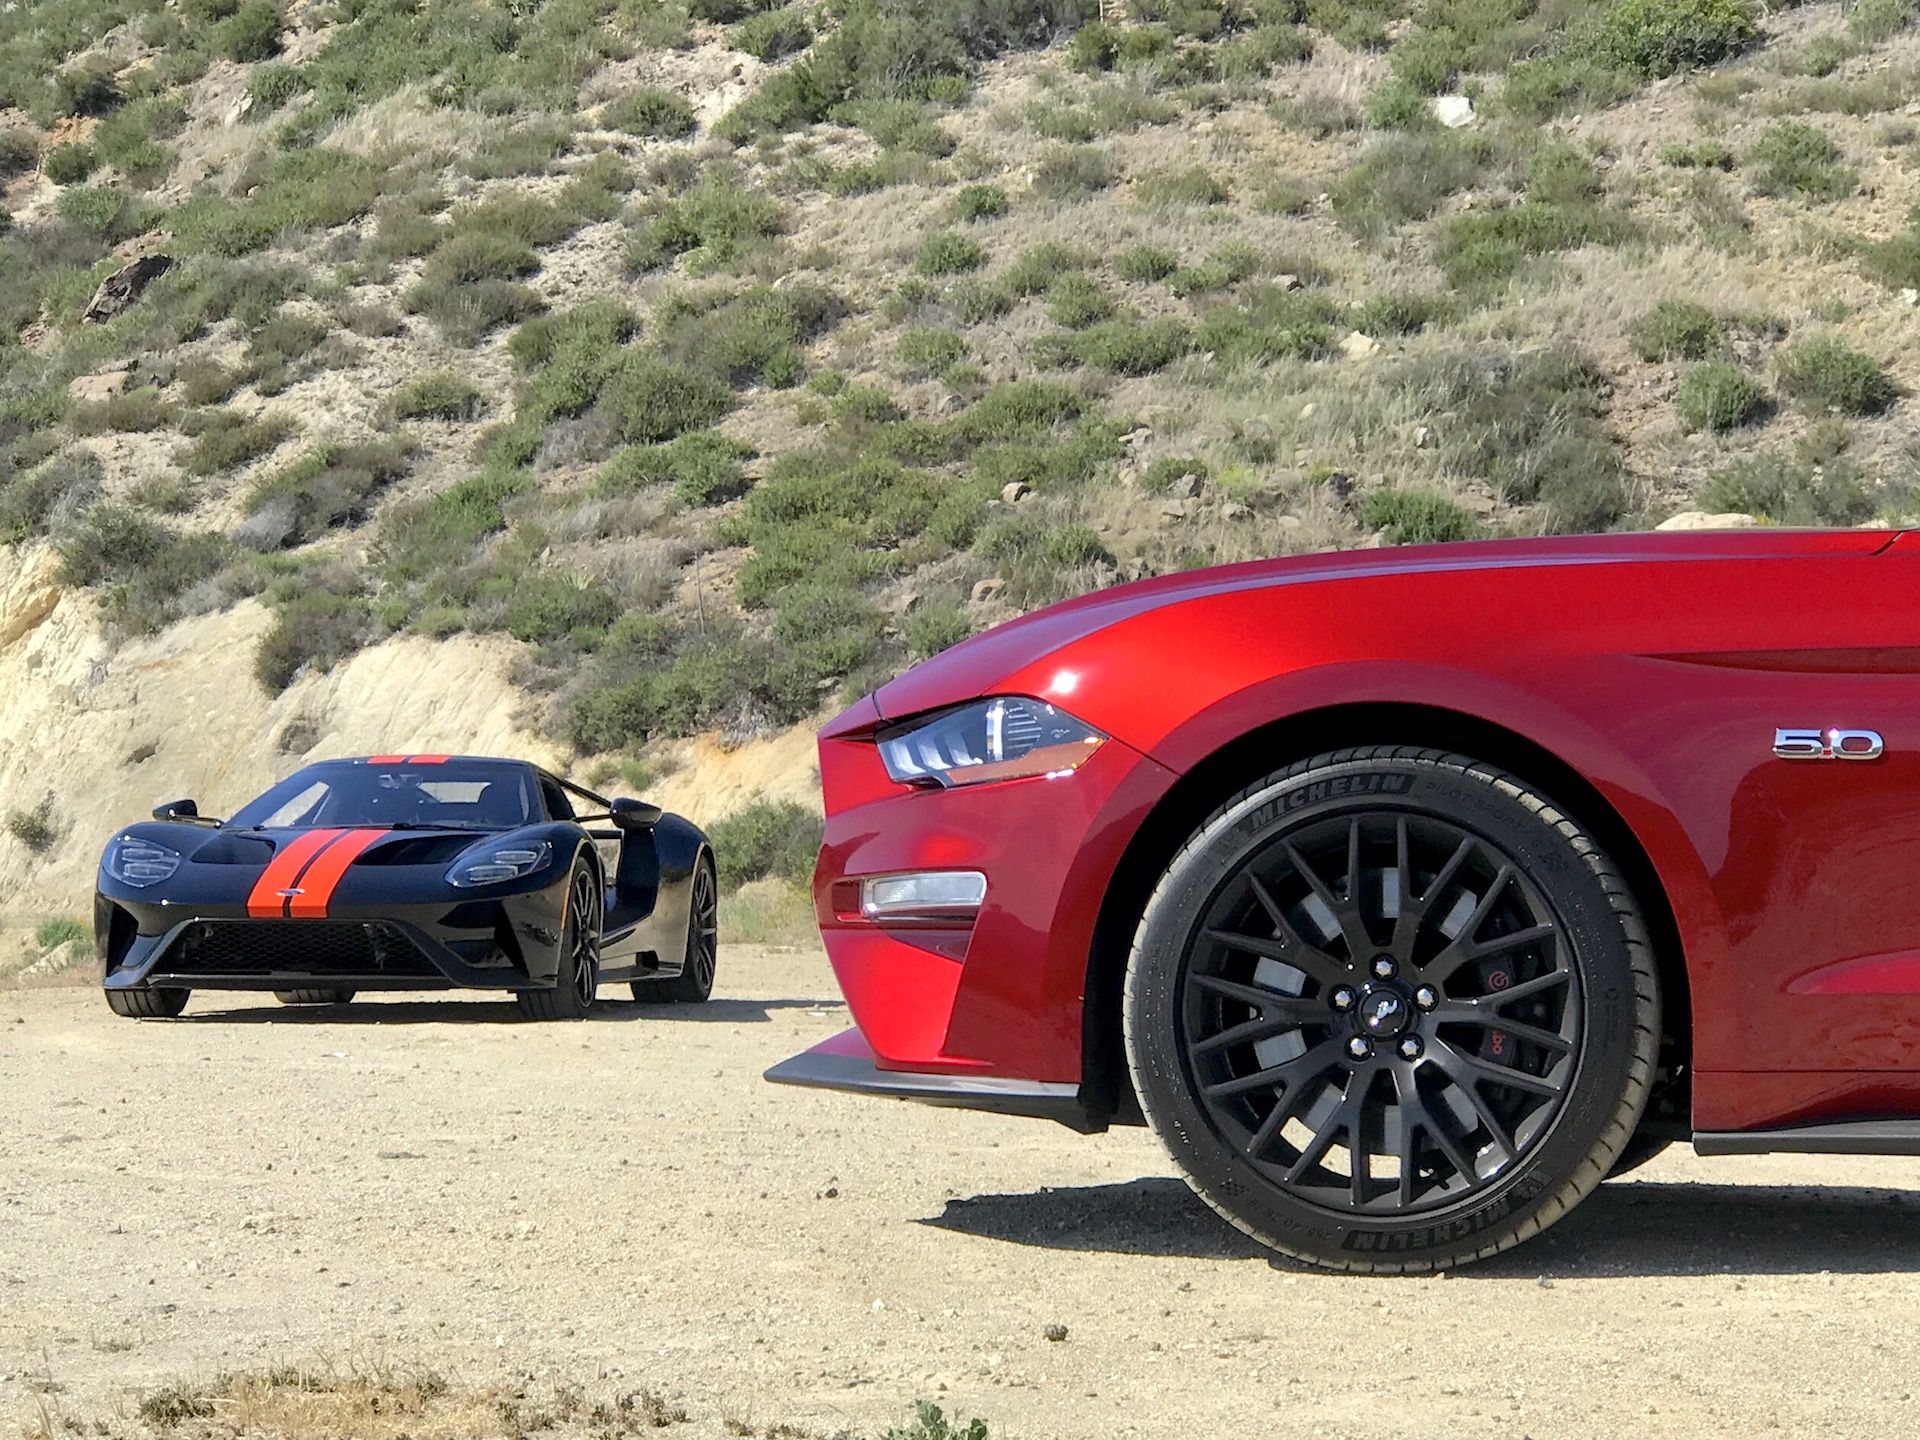 Ford GT and Ford Mustang GT: A celebration of performance